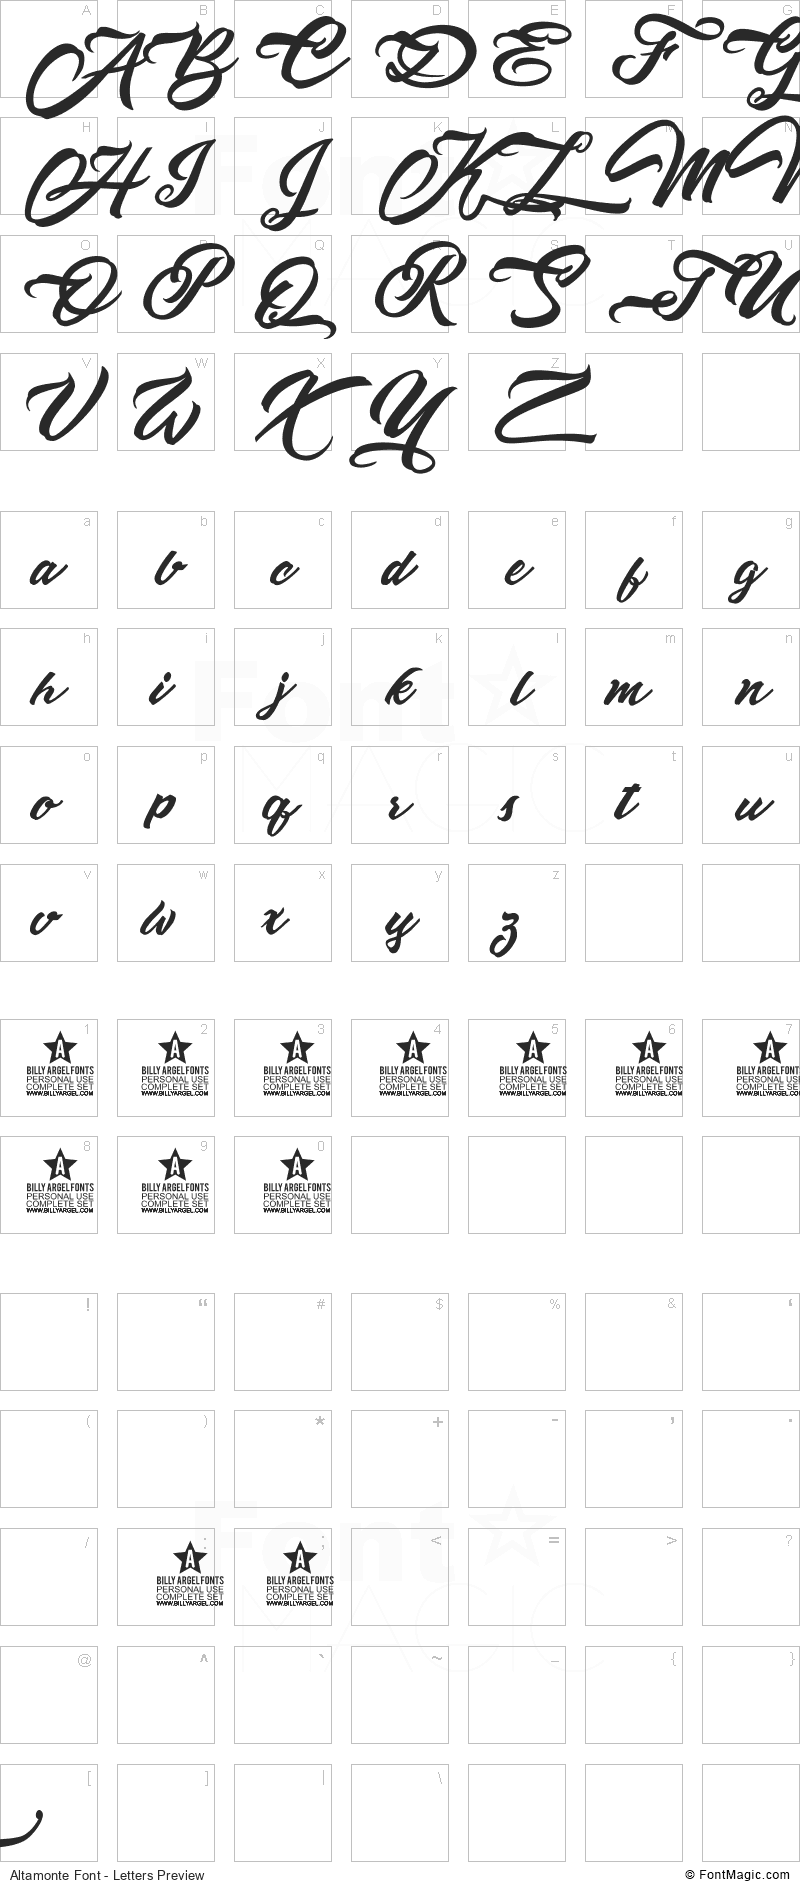 Altamonte Font - All Latters Preview Chart